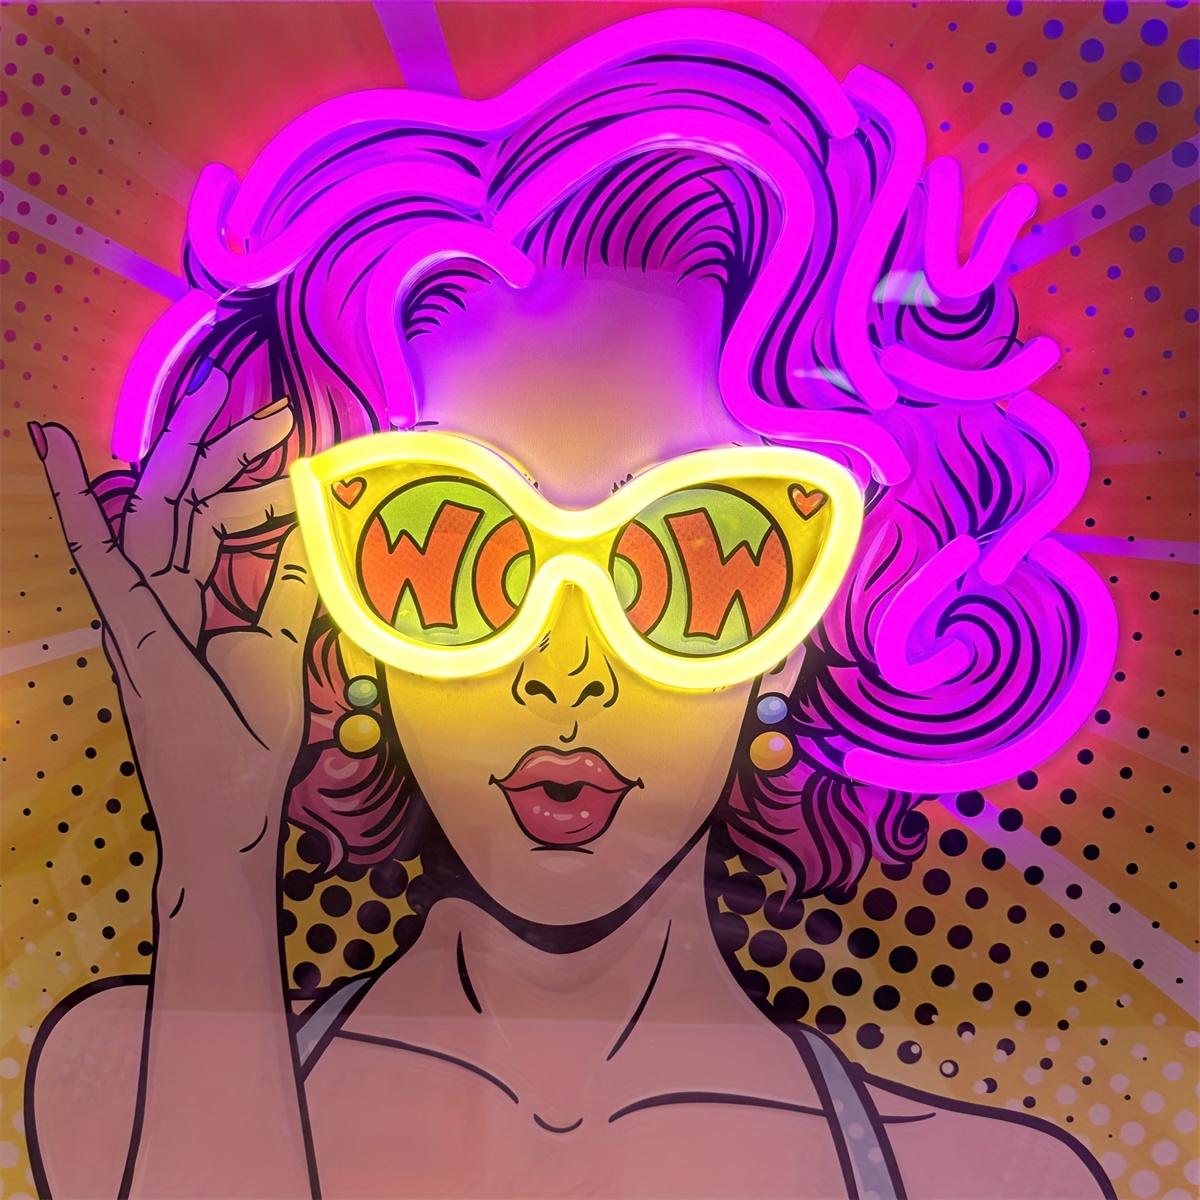 

Chic Curly Hair Girl 'wow' Neon Sign - Uv Printed, Wall-mounted Led Light For Bedroom, Bar, And Party Decor - Usb Powered